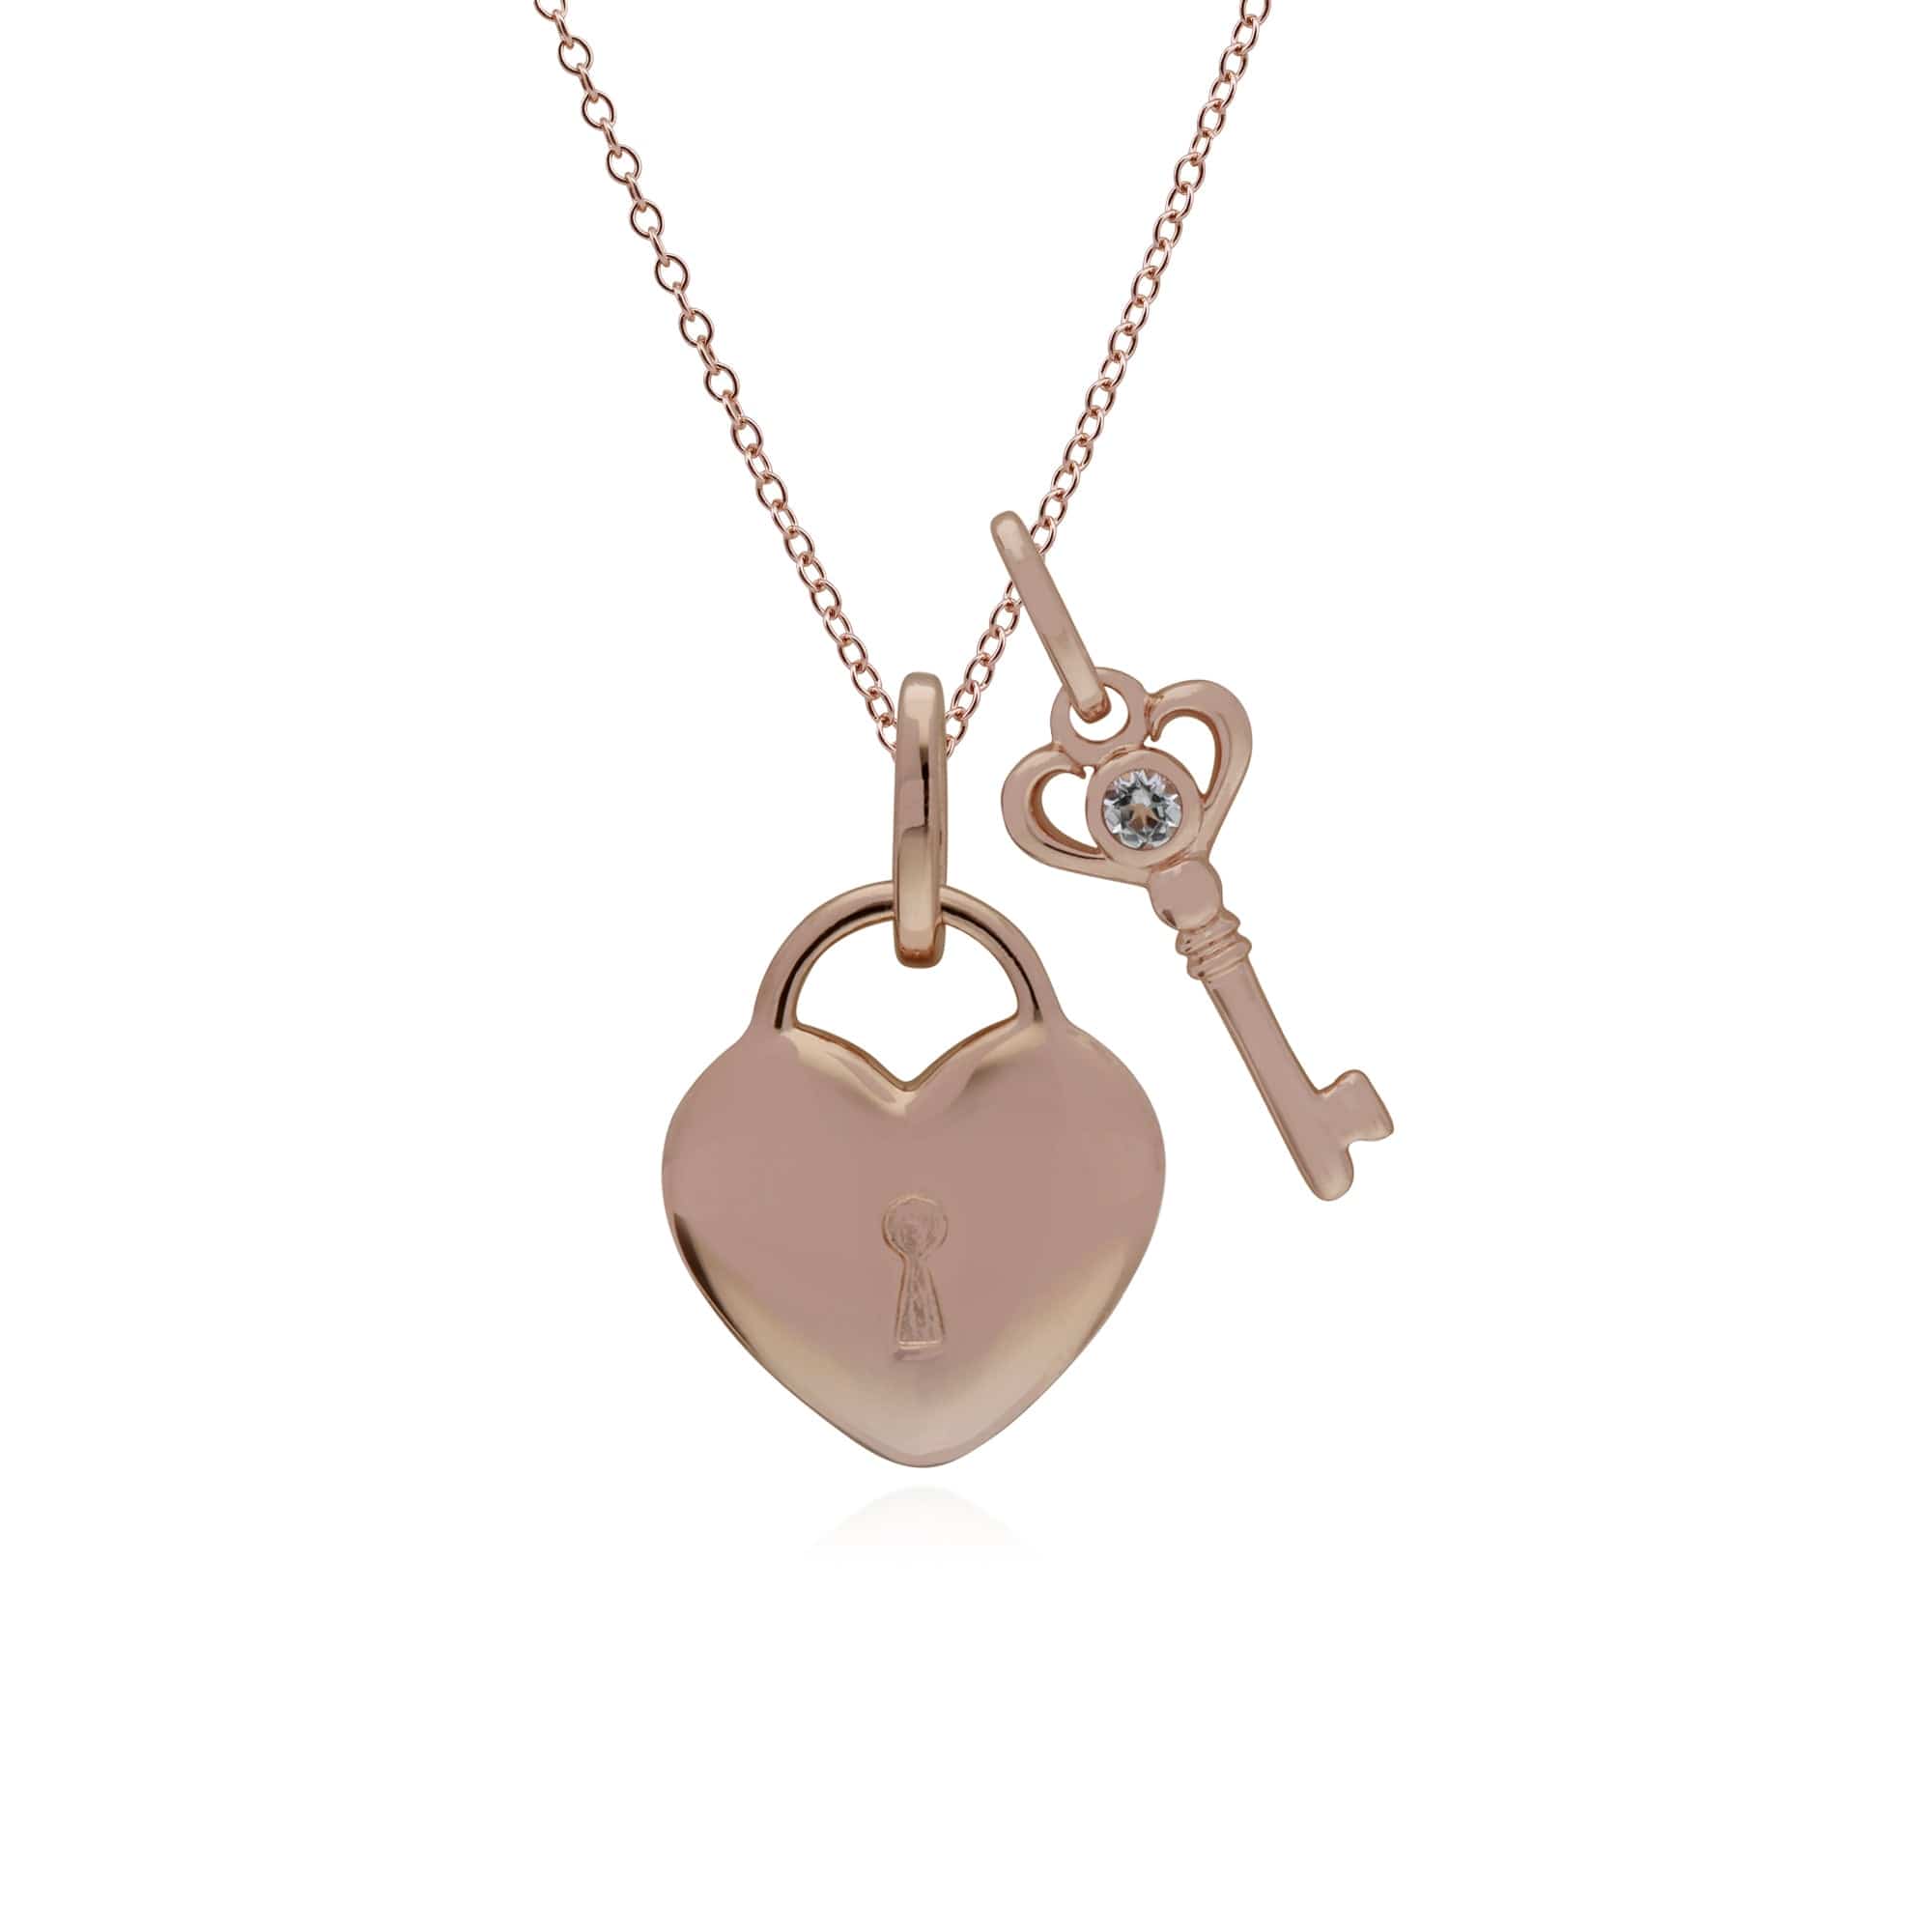 270P026310925-270P026901925 Classic Heart Lock Pendant & Clear Topaz Key Charm in Rose Gold Plated 925 Sterling Silver 1